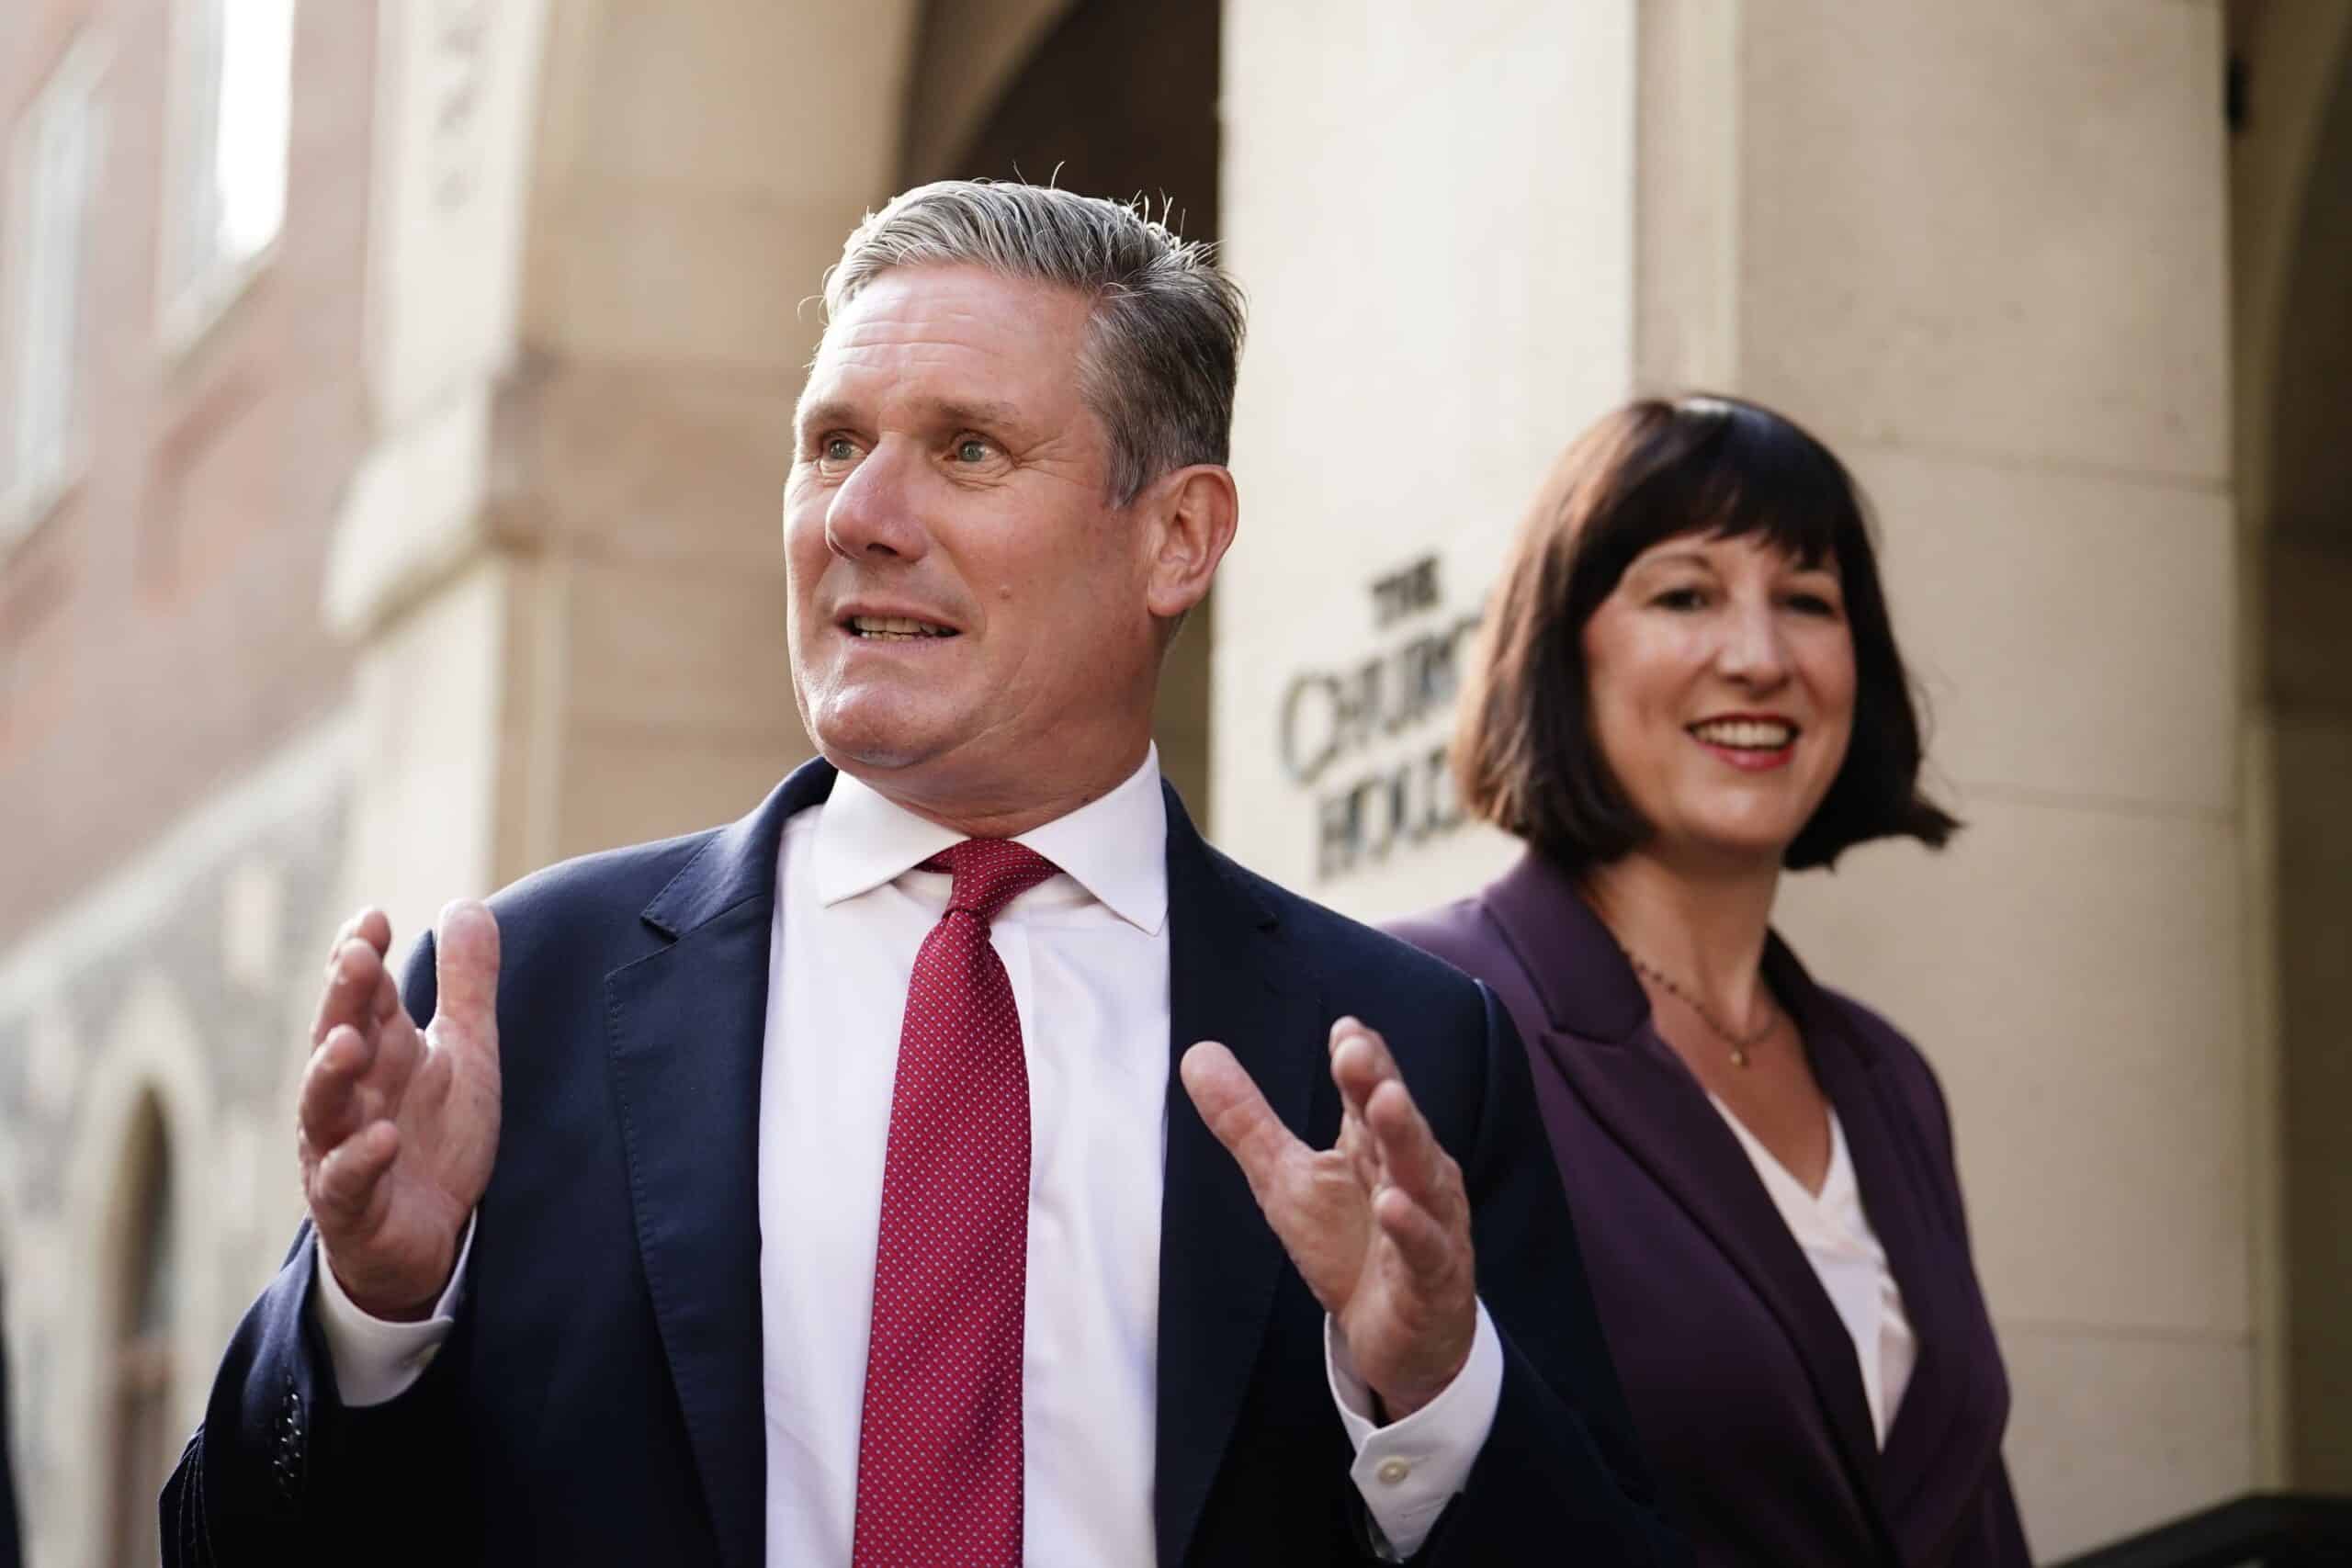 Labour would seek ‘much better’ Brexit deal from Brussels – Starmer